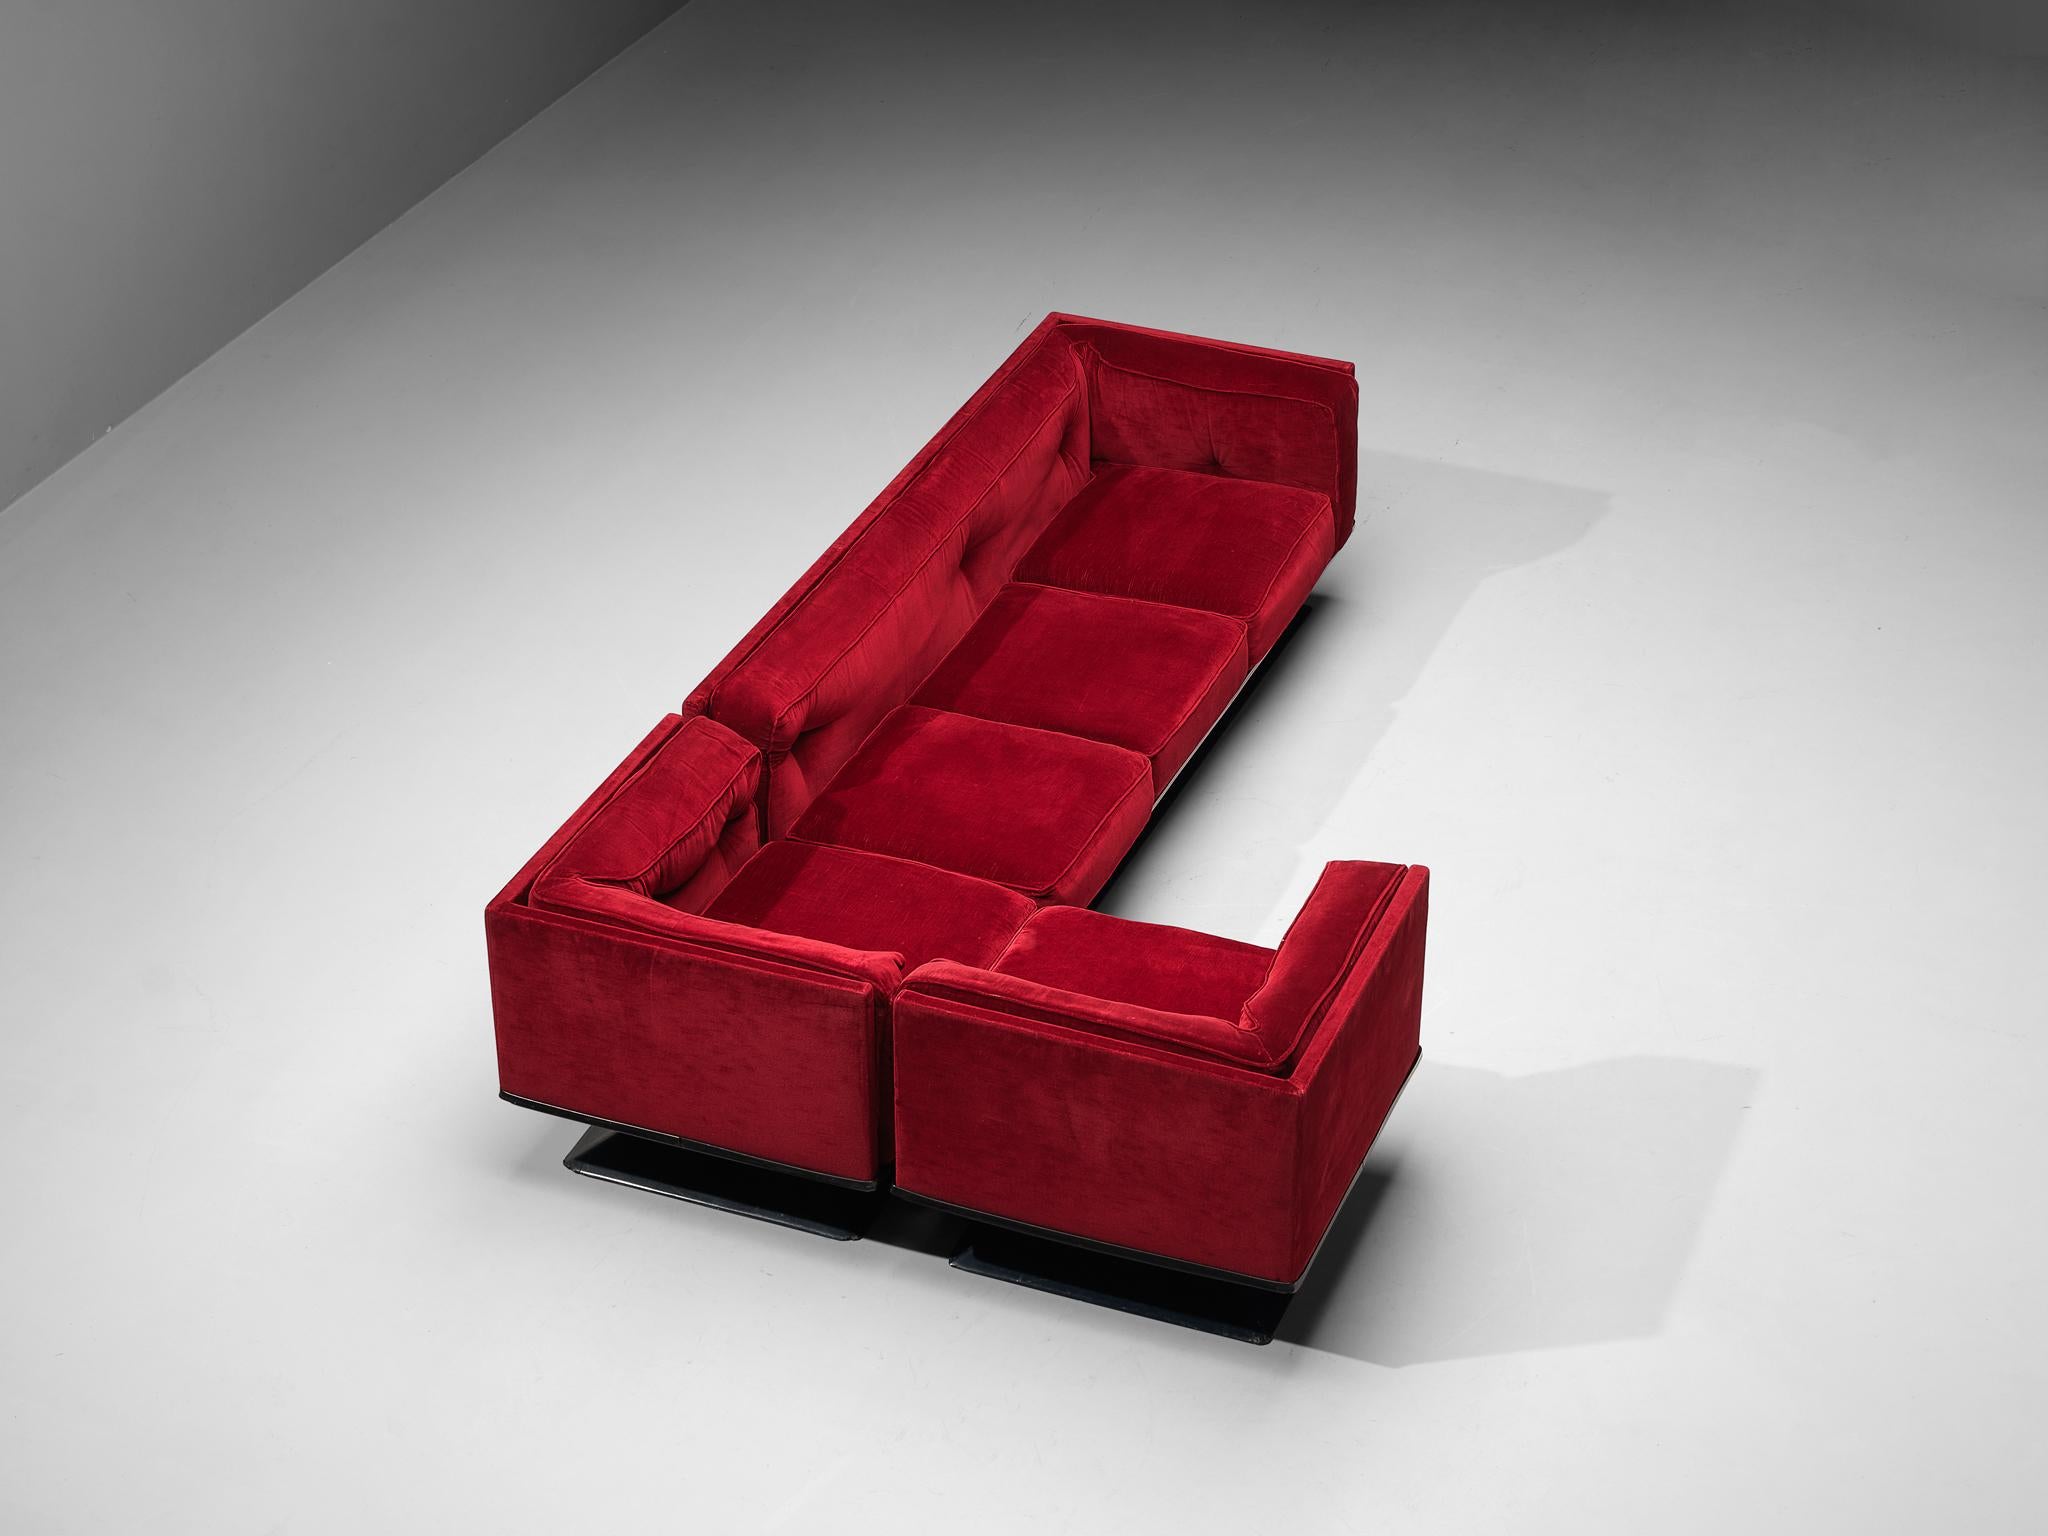 Luigi Pellegrin for MIM Roma, modular sofa, velvet, metal, polyester, Italy, 1950s.

This versatile lounge set by Luigi Pellegrin consists of one regular element and two corner elements. A highly versatile piece of furniture that allows you to